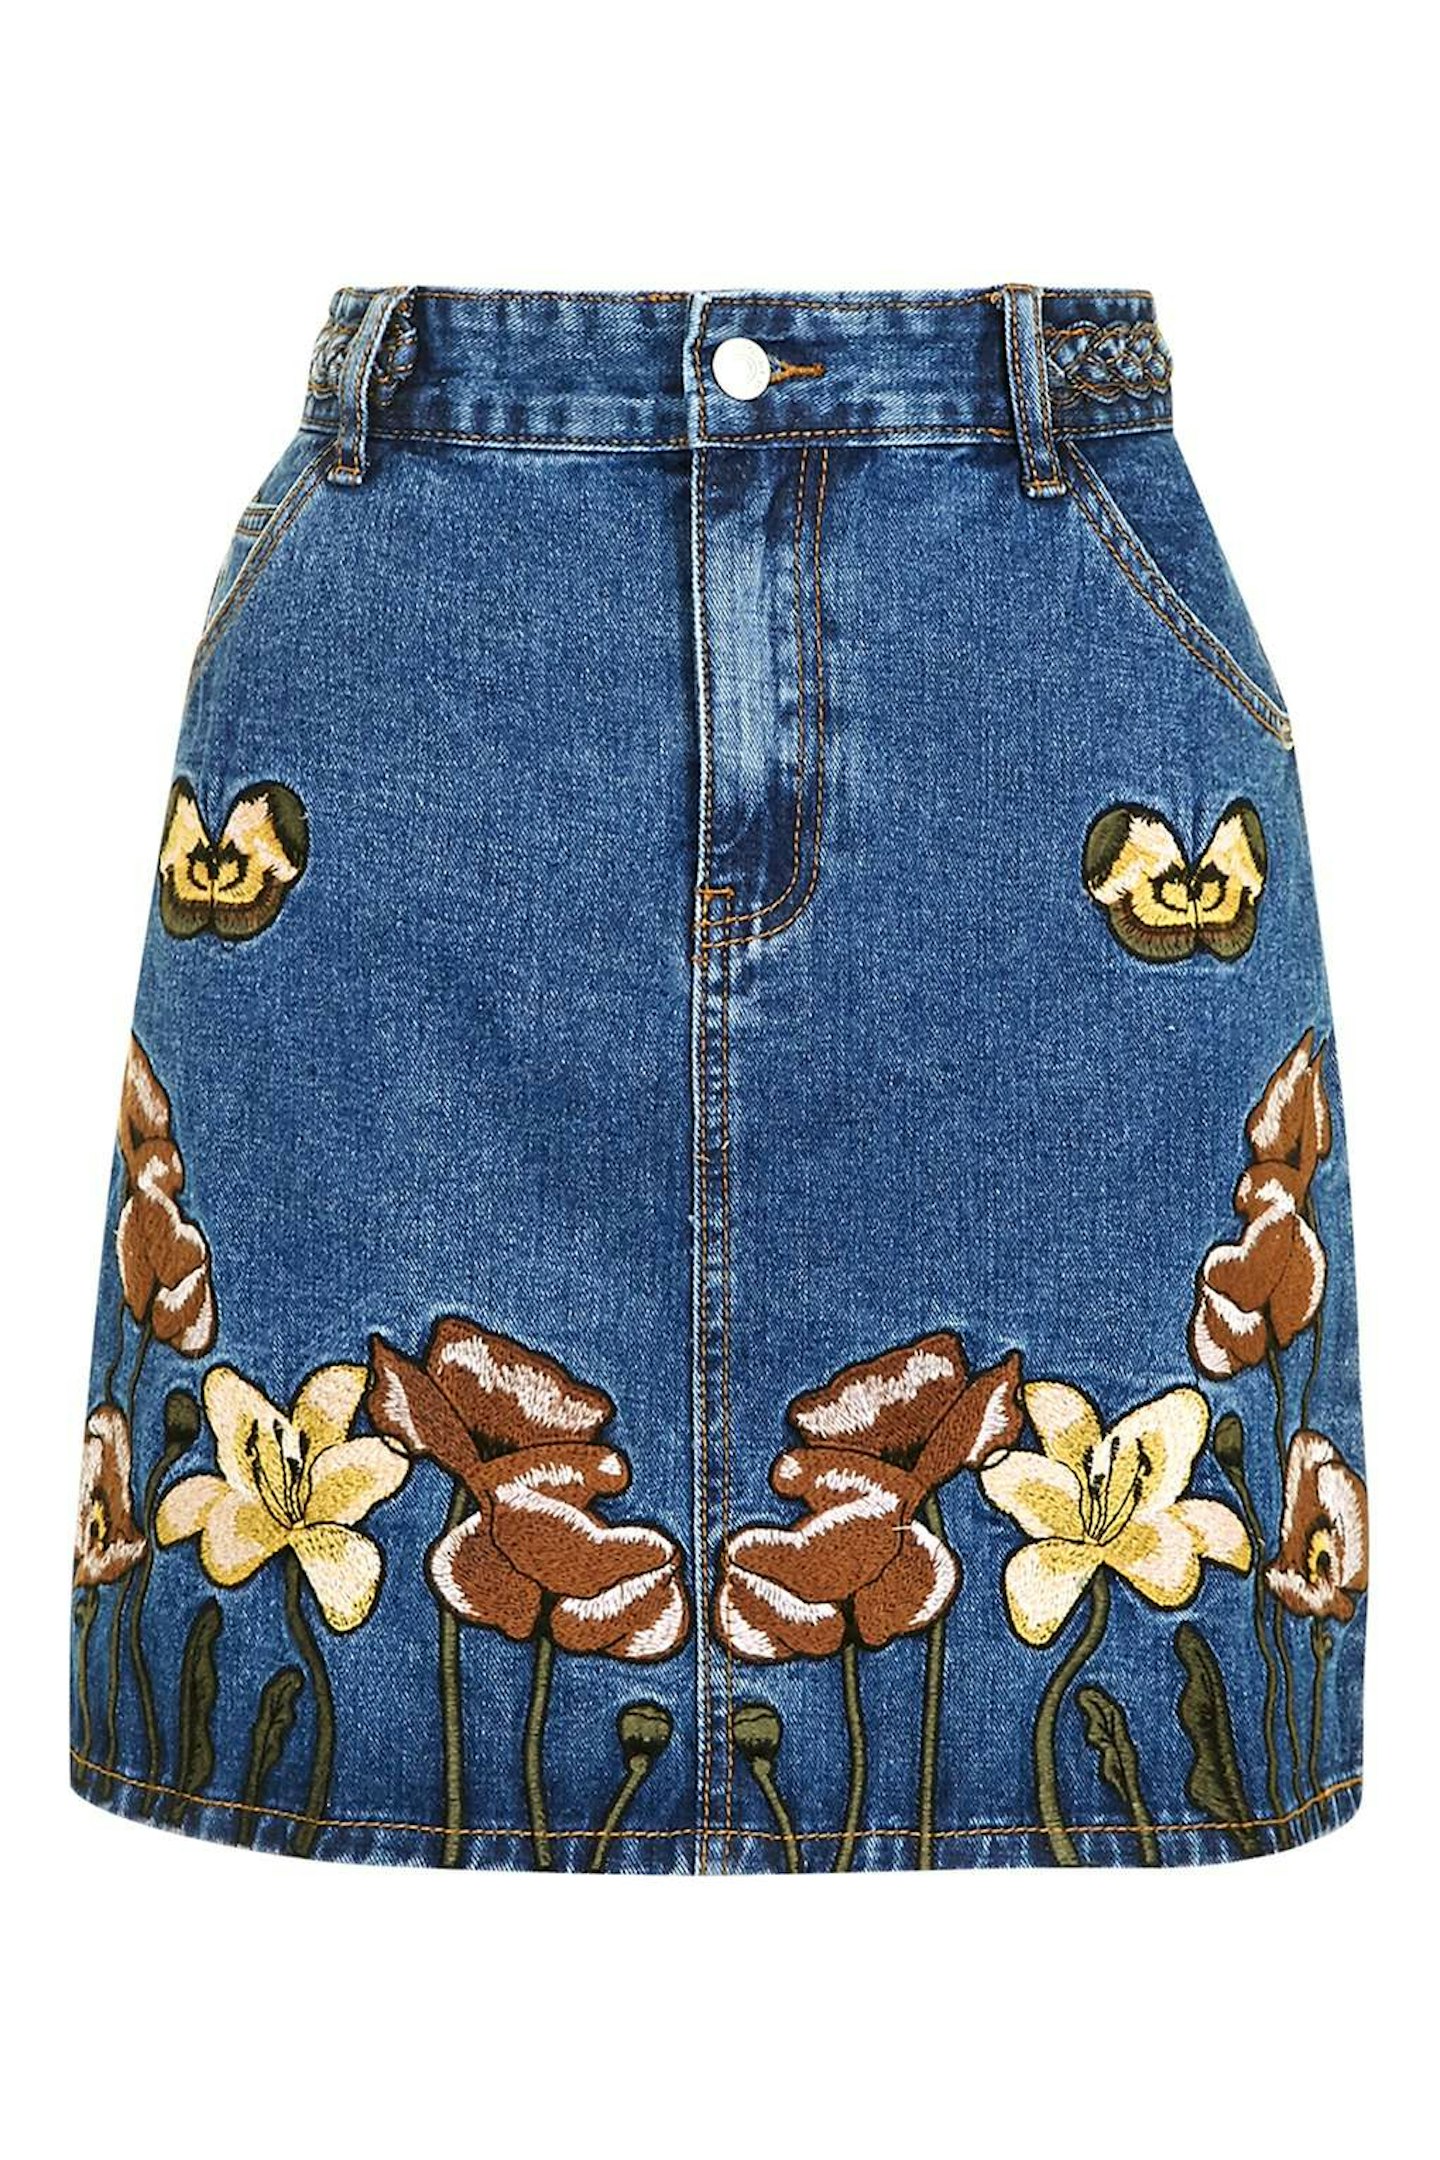 Topshop Embroidered Denim Skirt by Glamorous £26